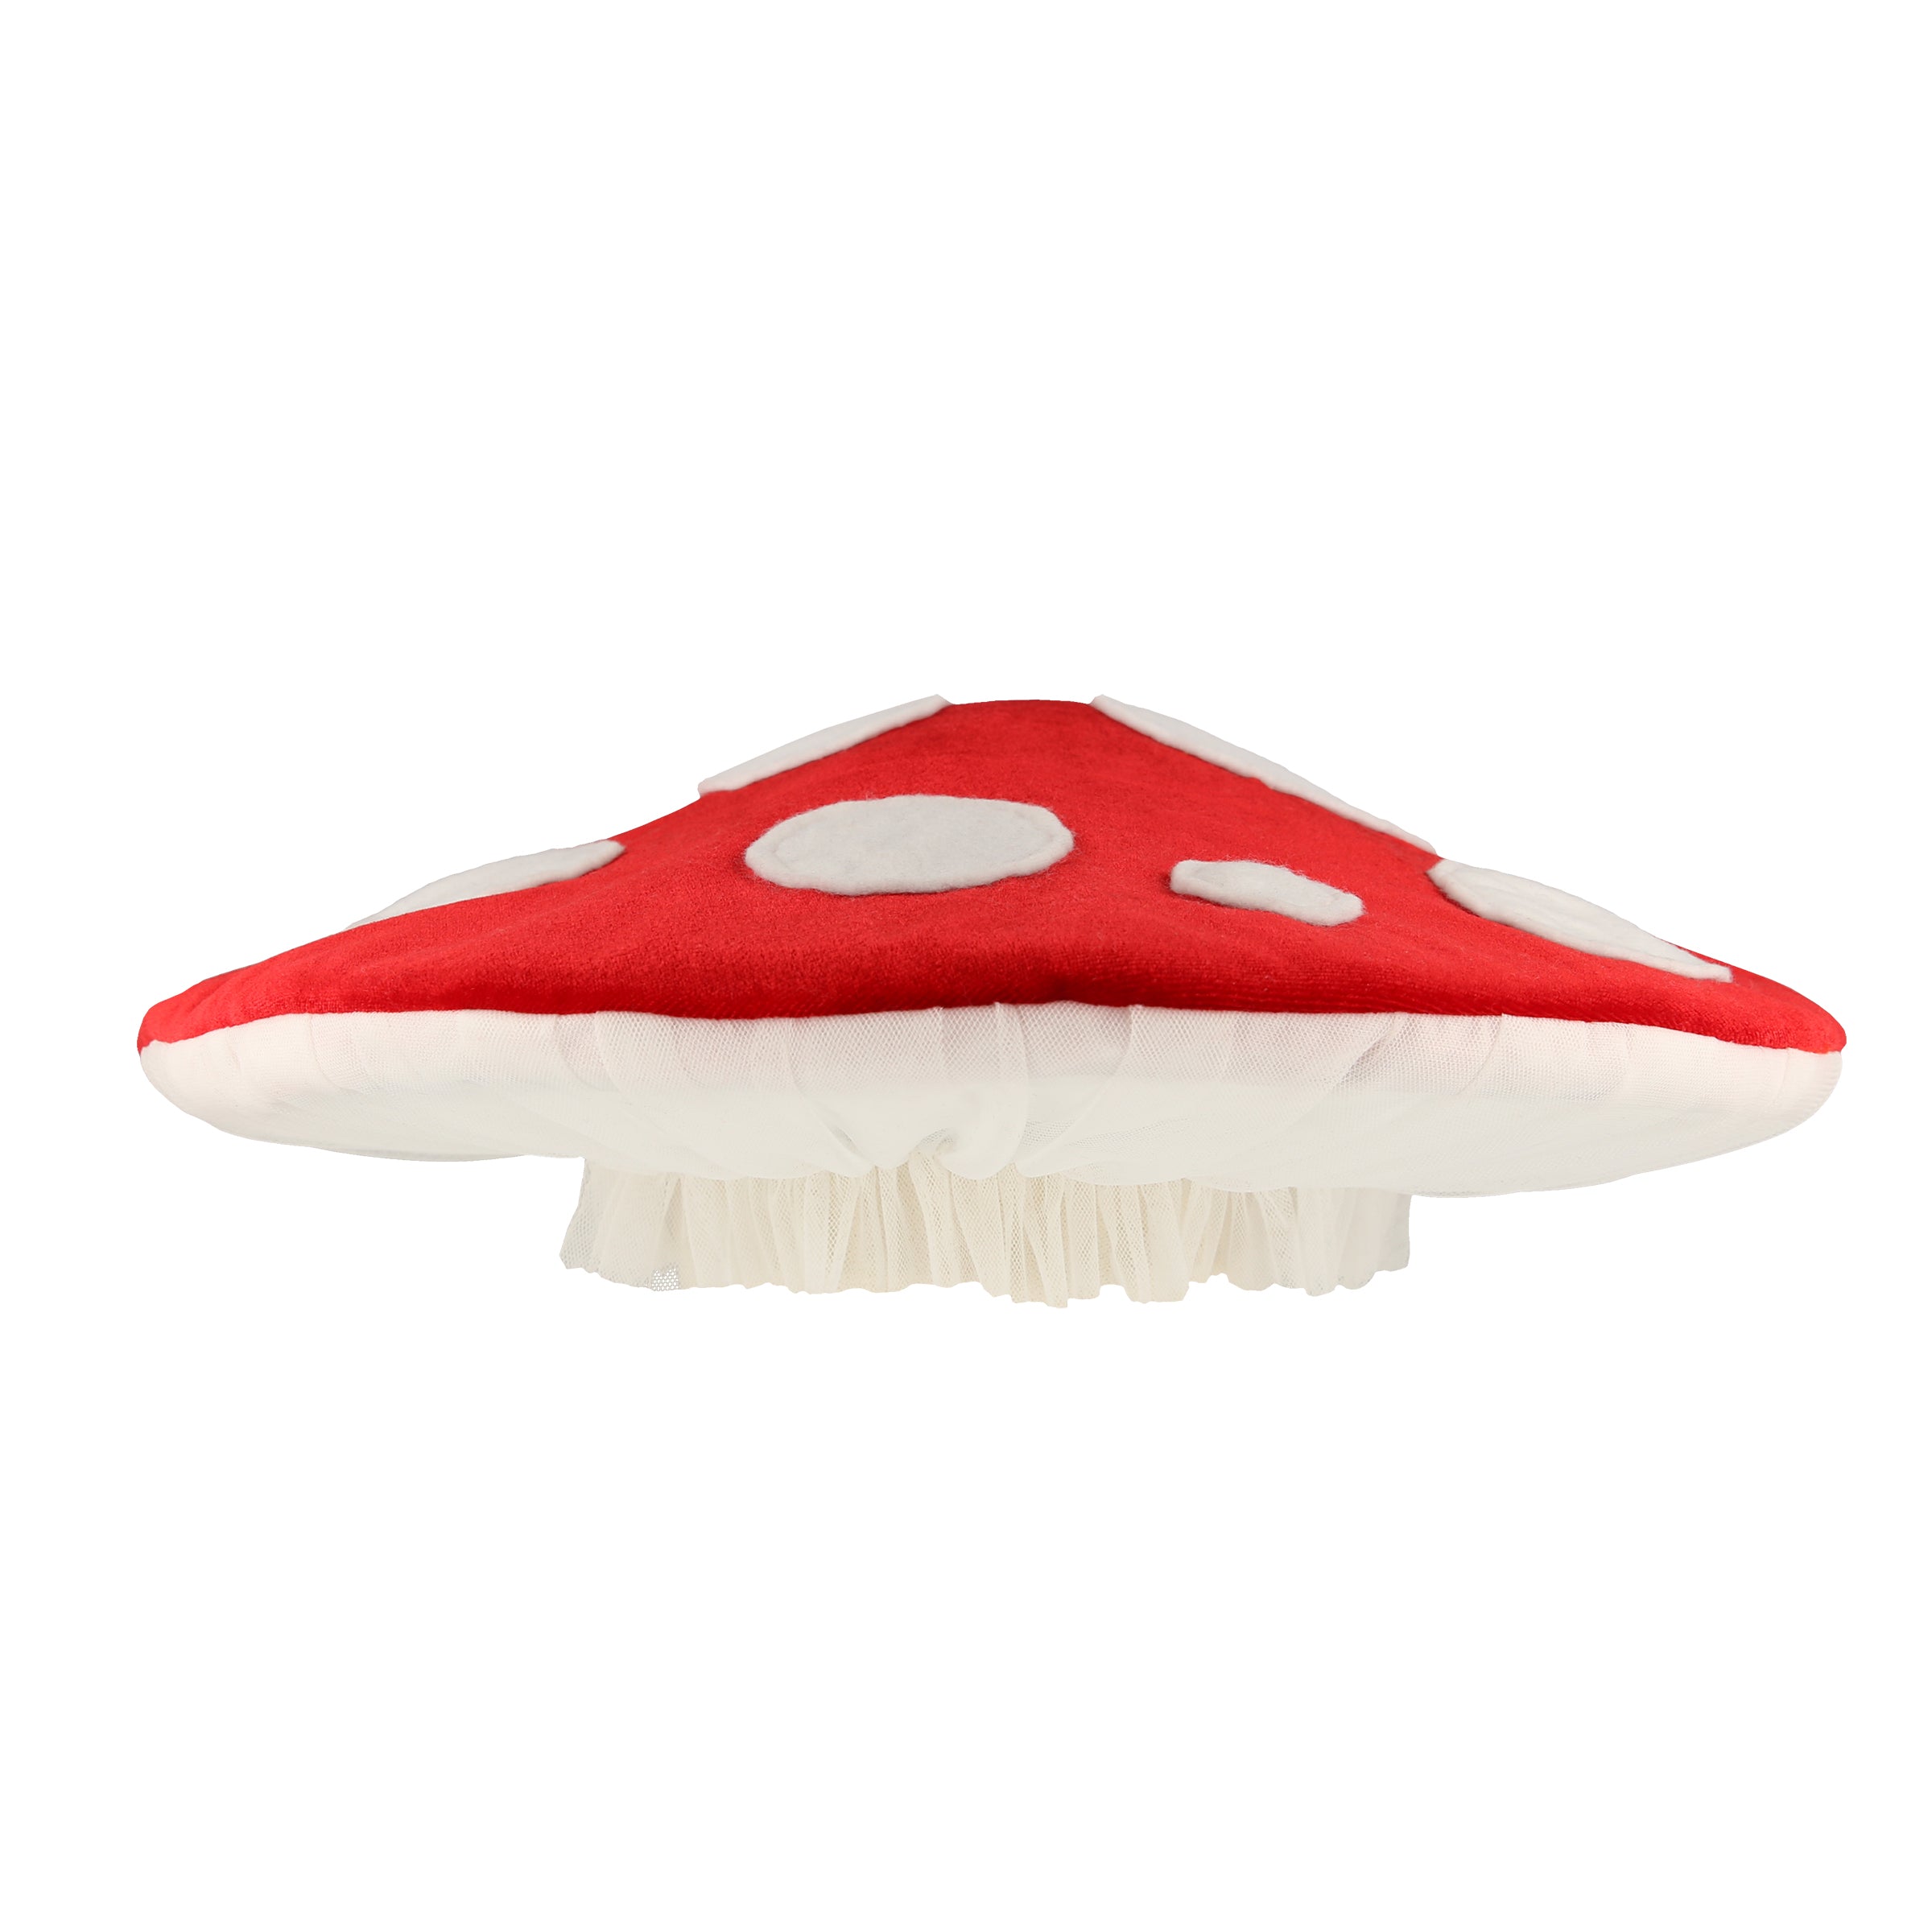 This adorable mushroom hat is crafted from soft velvet, perfect to add to your Halloween party supplies or for a fairy party.